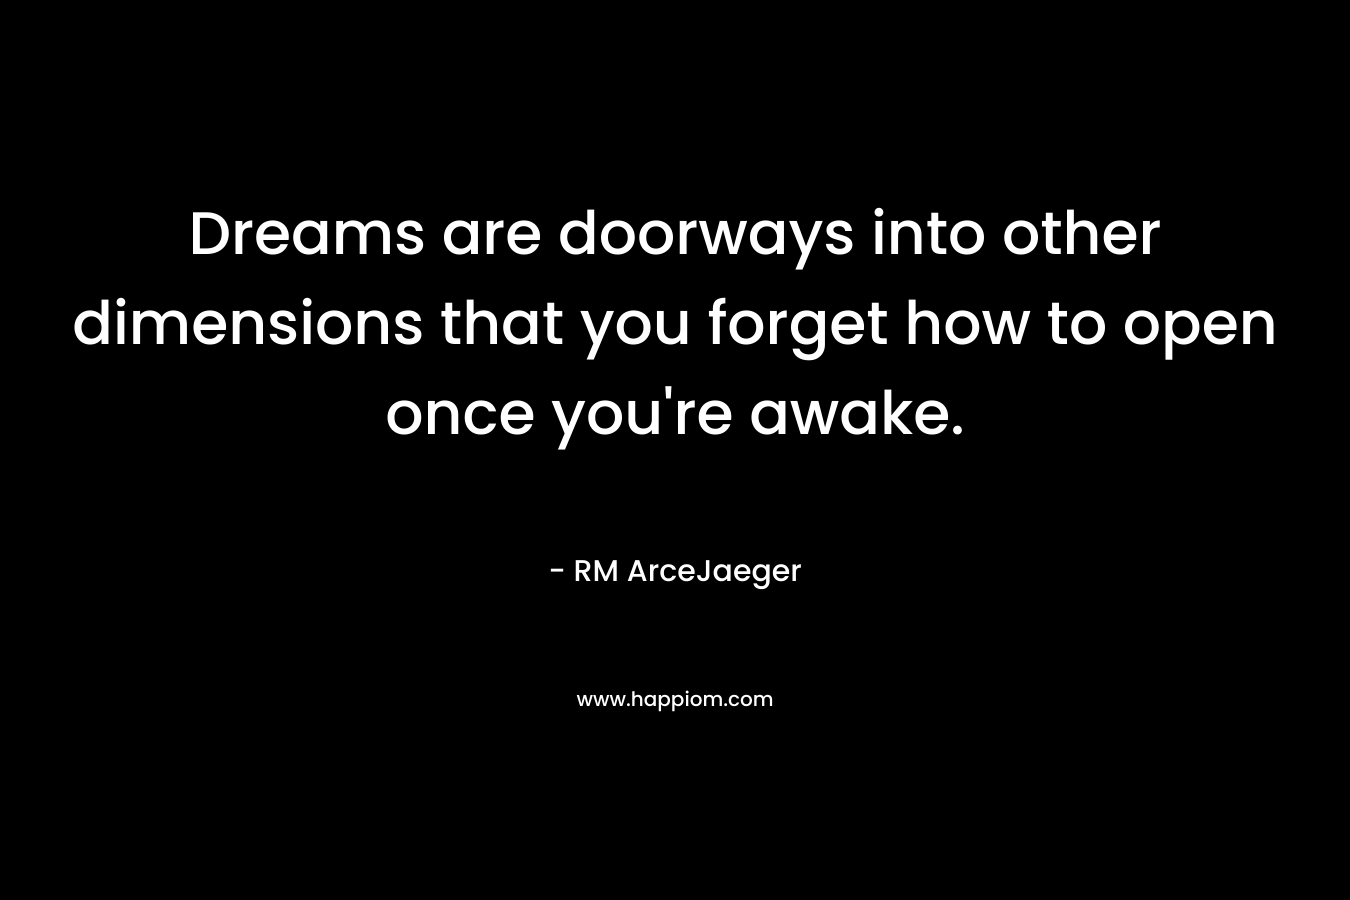 Dreams are doorways into other dimensions that you forget how to open once you’re awake. – RM ArceJaeger